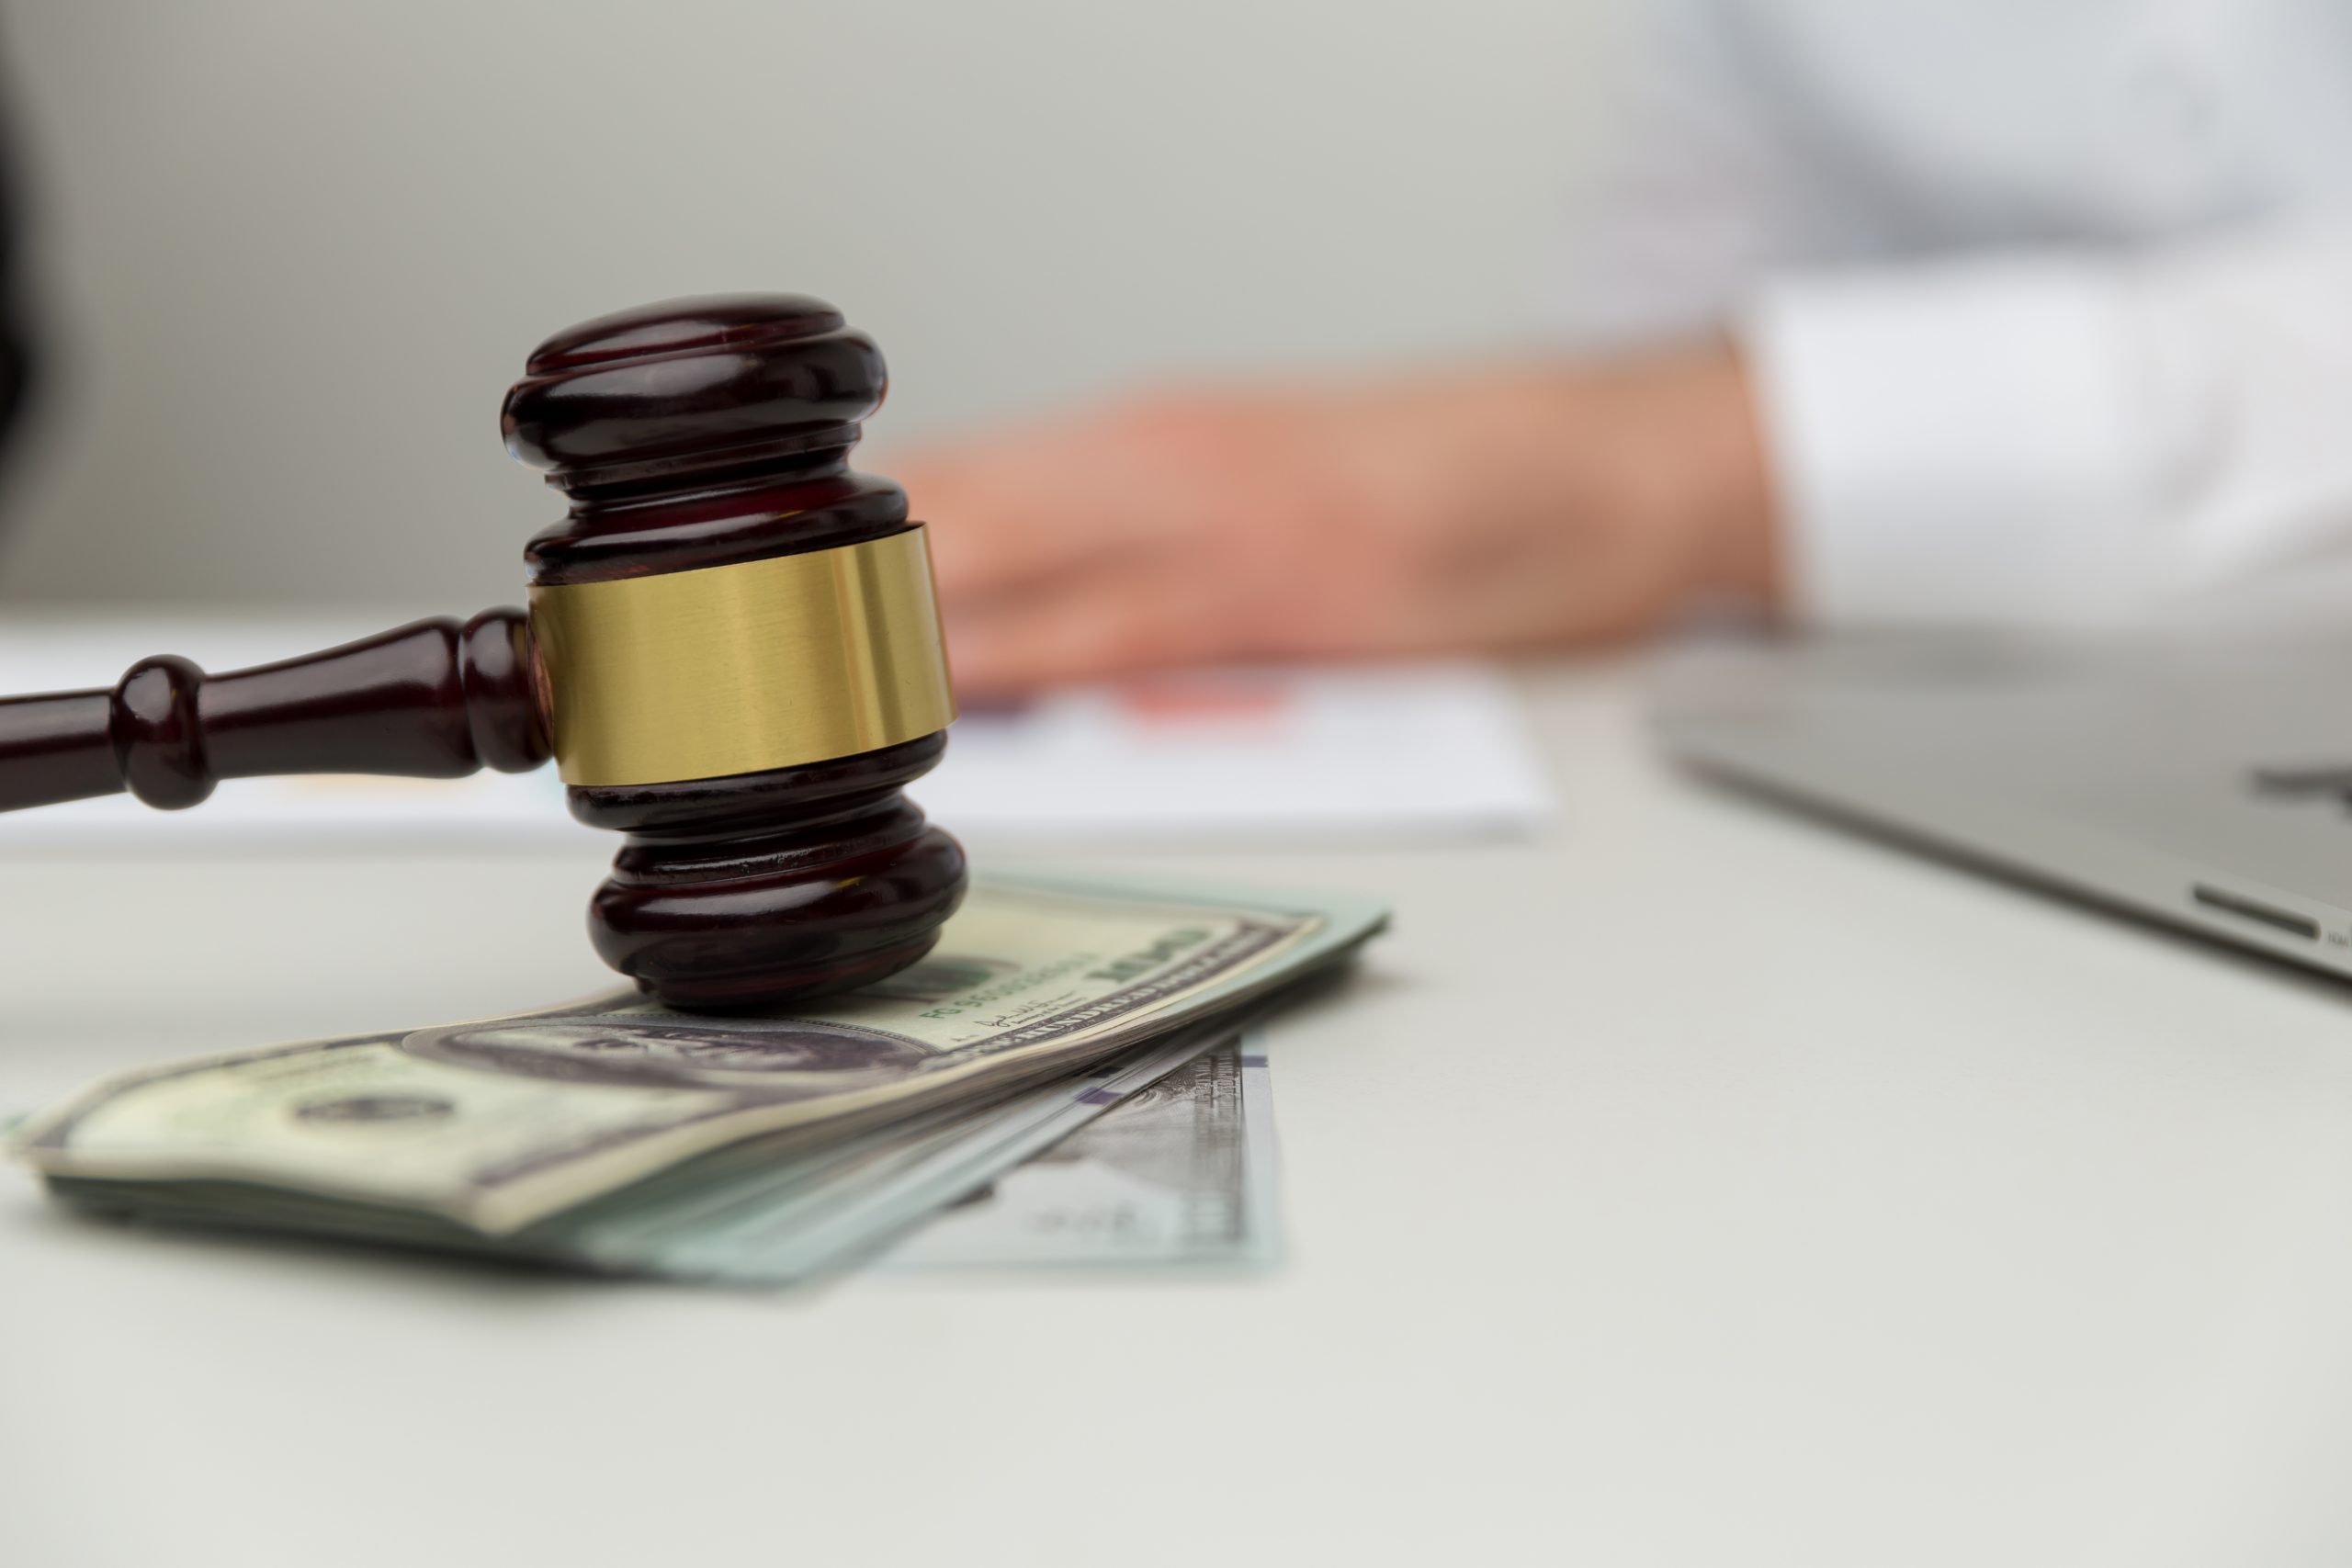 A wooden gavel with a brass band rests on top of a stack of US dollar bills on a white desk. In the background, blurred, are the hands of a person and a laptop. The scene suggests the costs and benefits of legal action in a financial context.